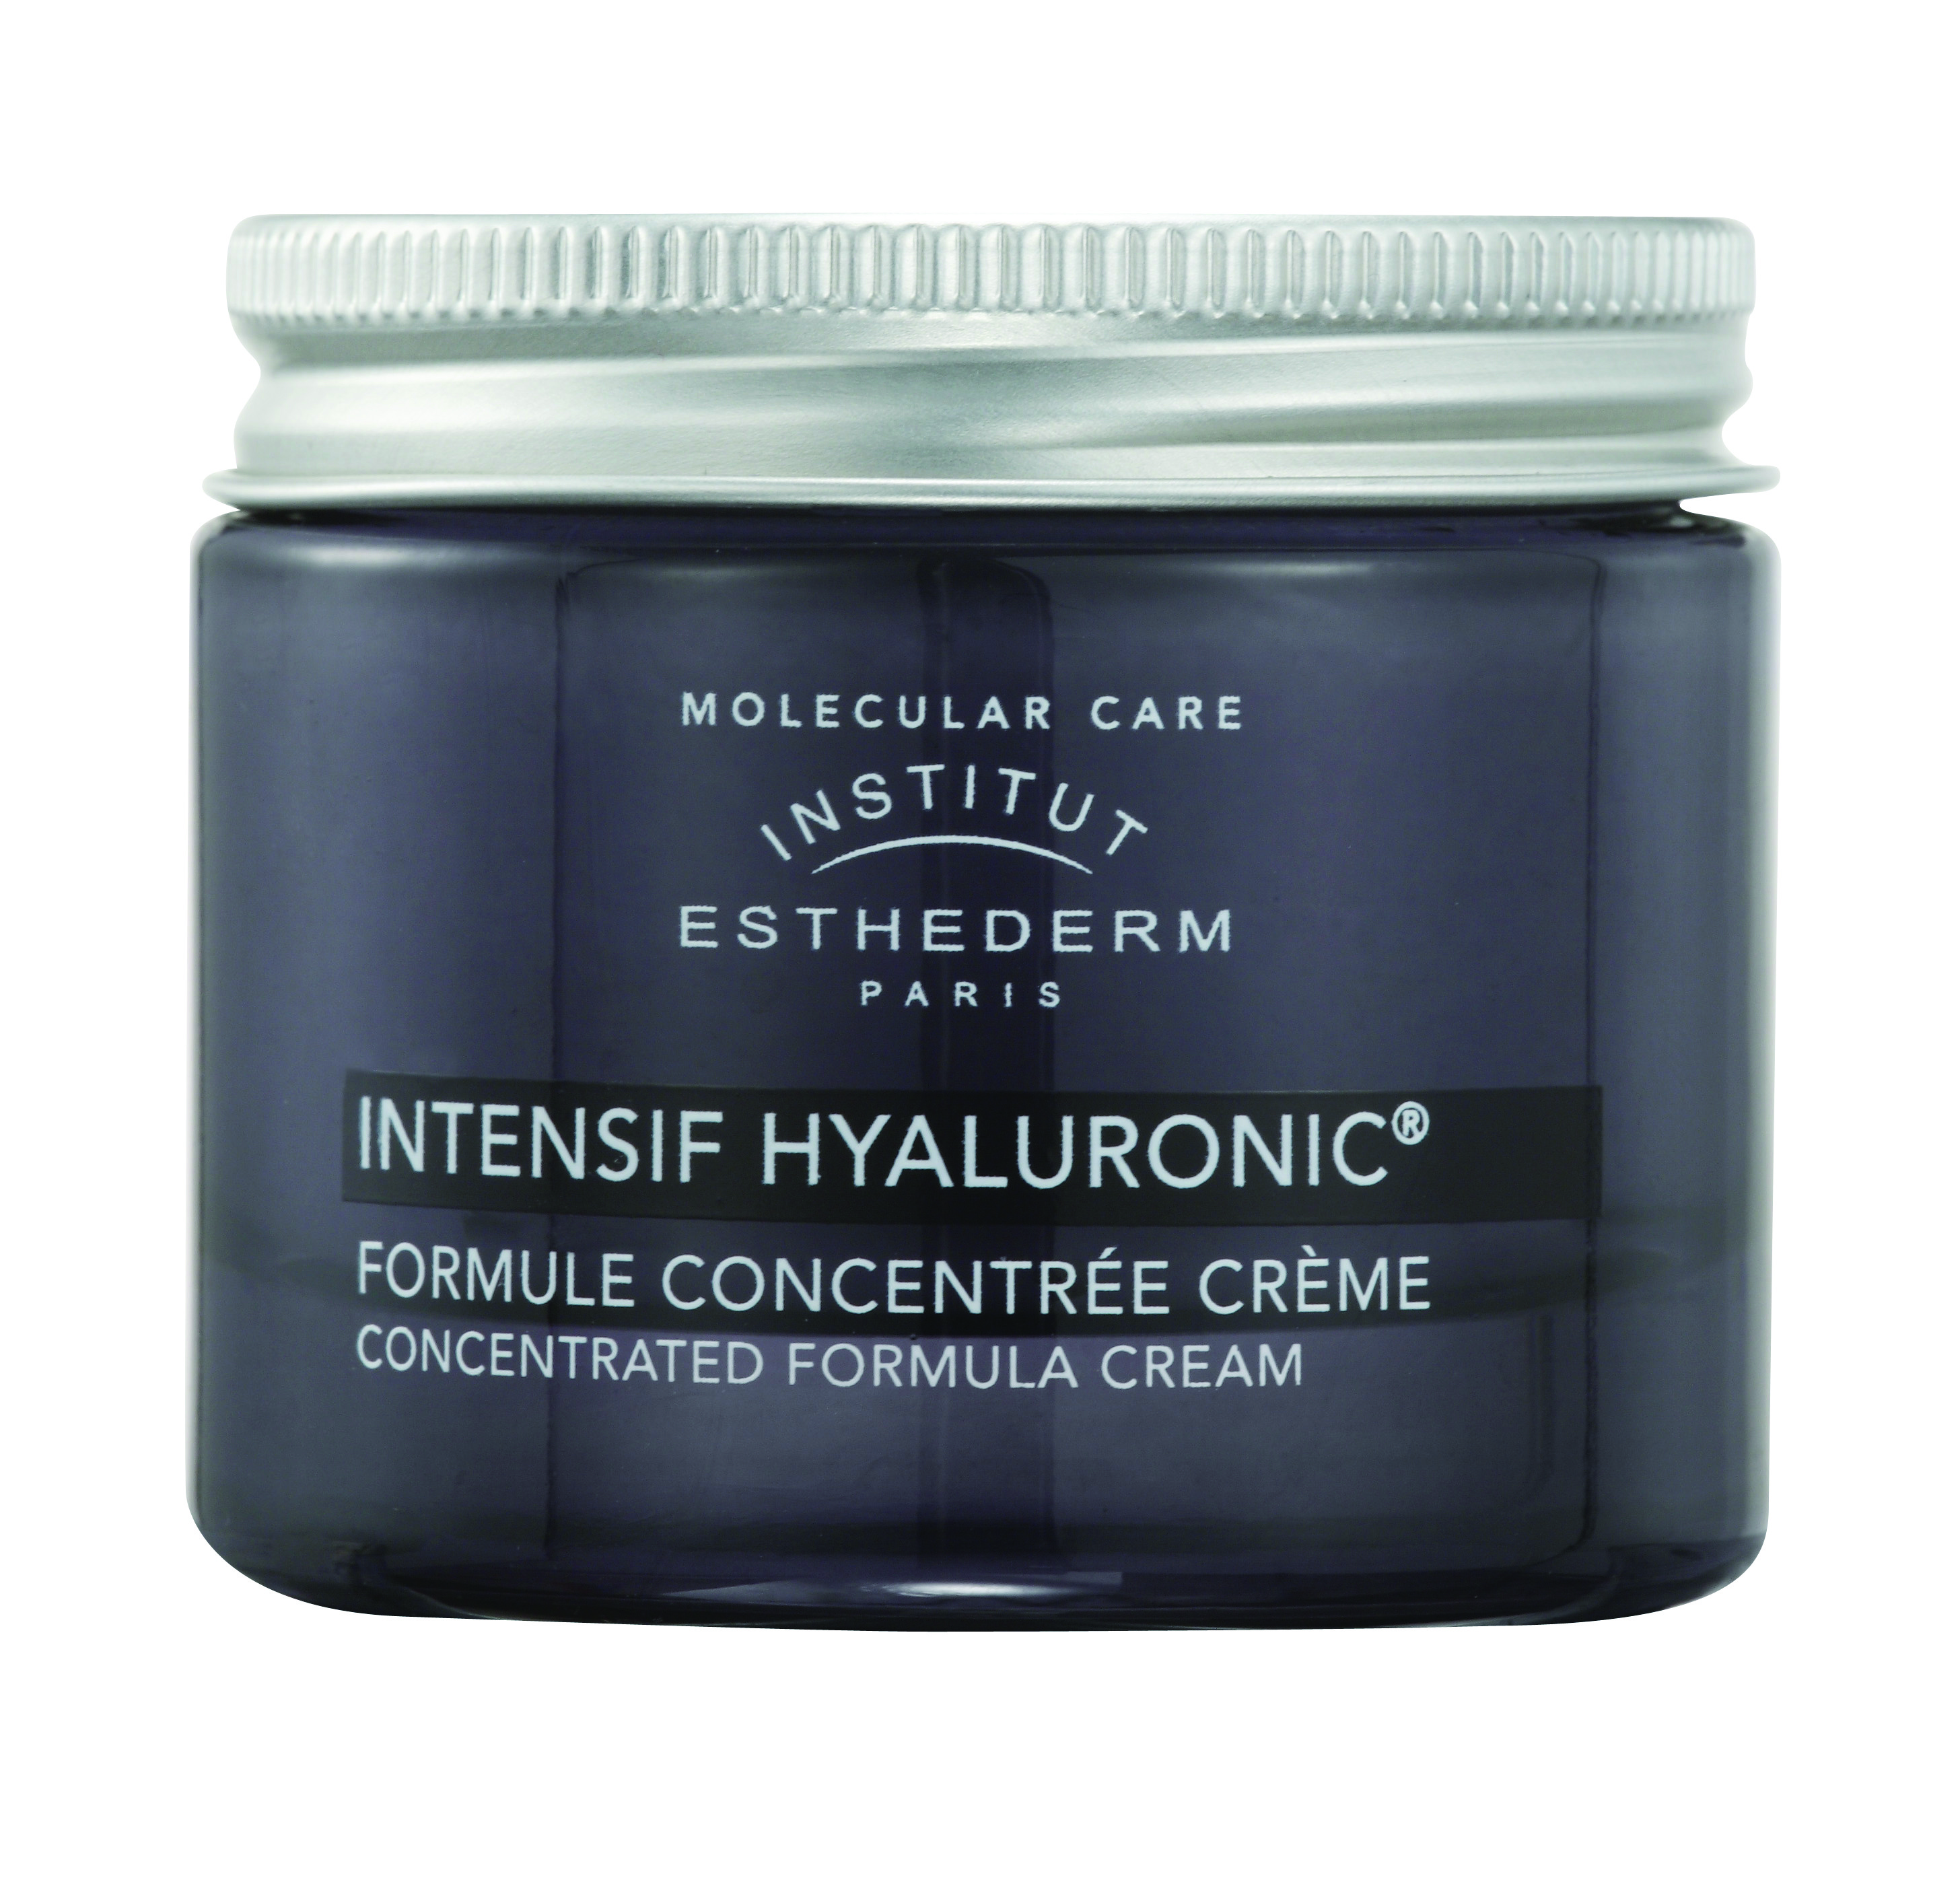 Intensif Hyaluronic concentrated formula cream